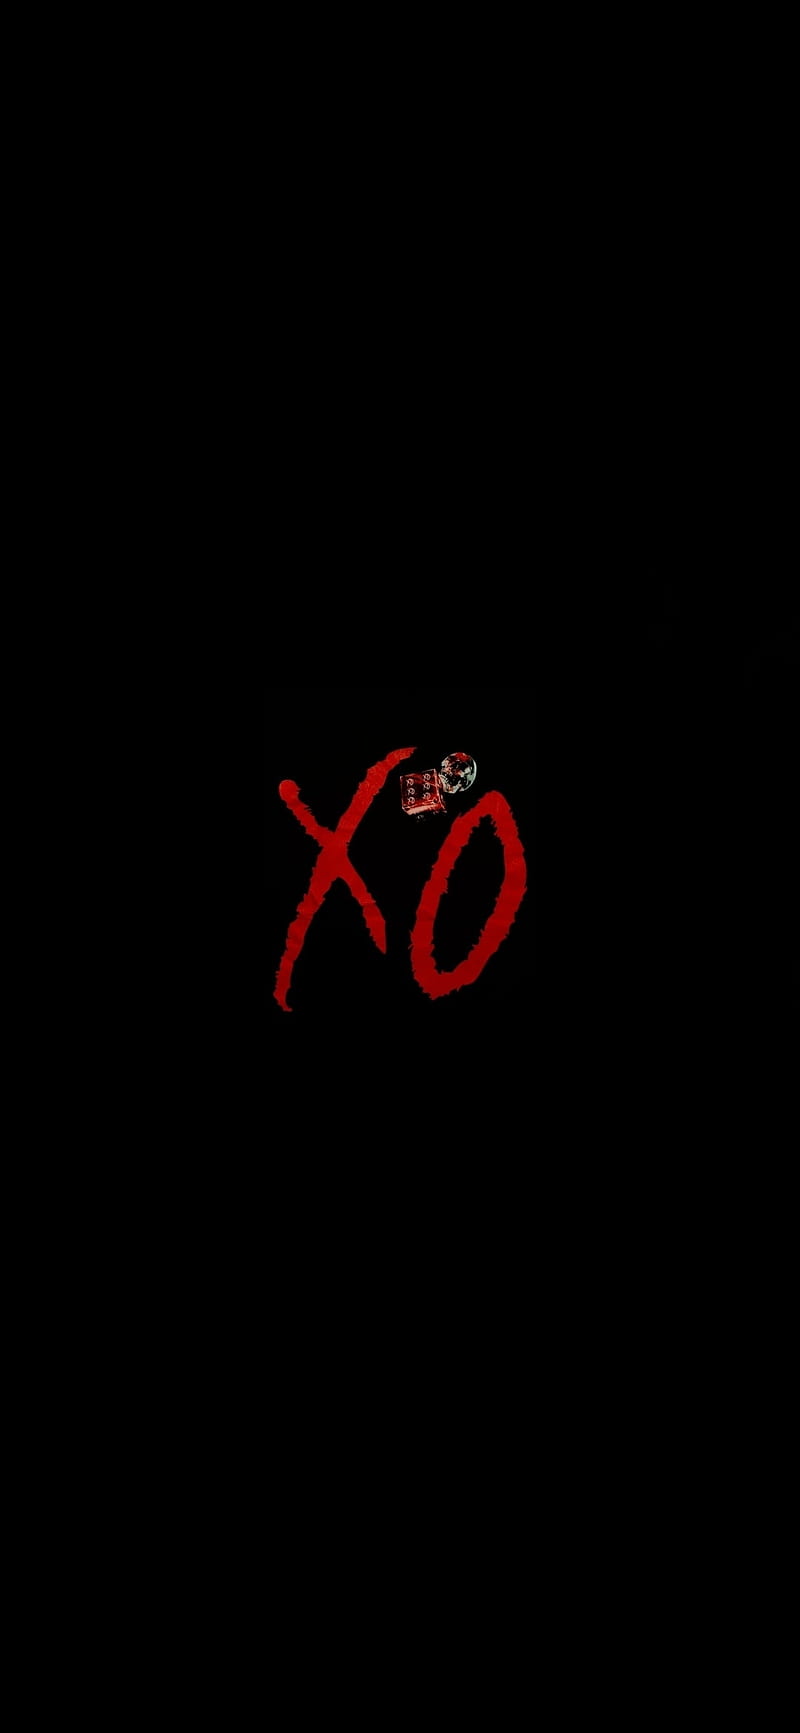 xo the weeknd iphone wallpaper  The weeknd background Creepy  photography The weeknd